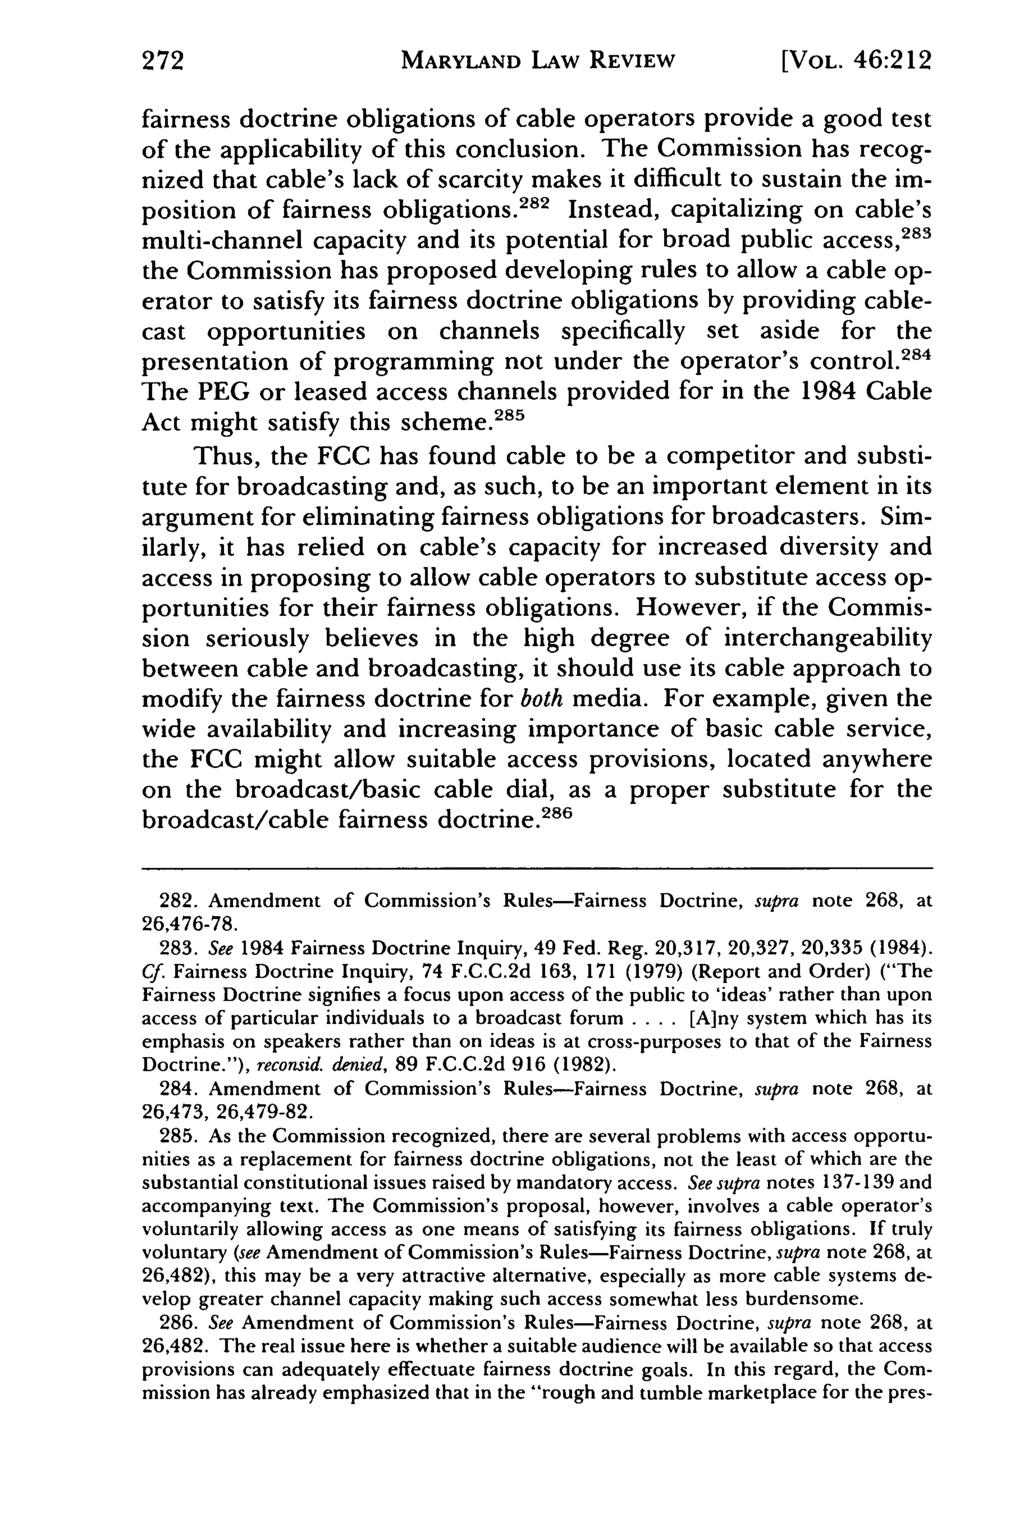 272 MARYLAND LAW REVIEW [VOL. 46:212 fairness doctrine obligations of cable operators provide a good test of the applicability of this conclusion.